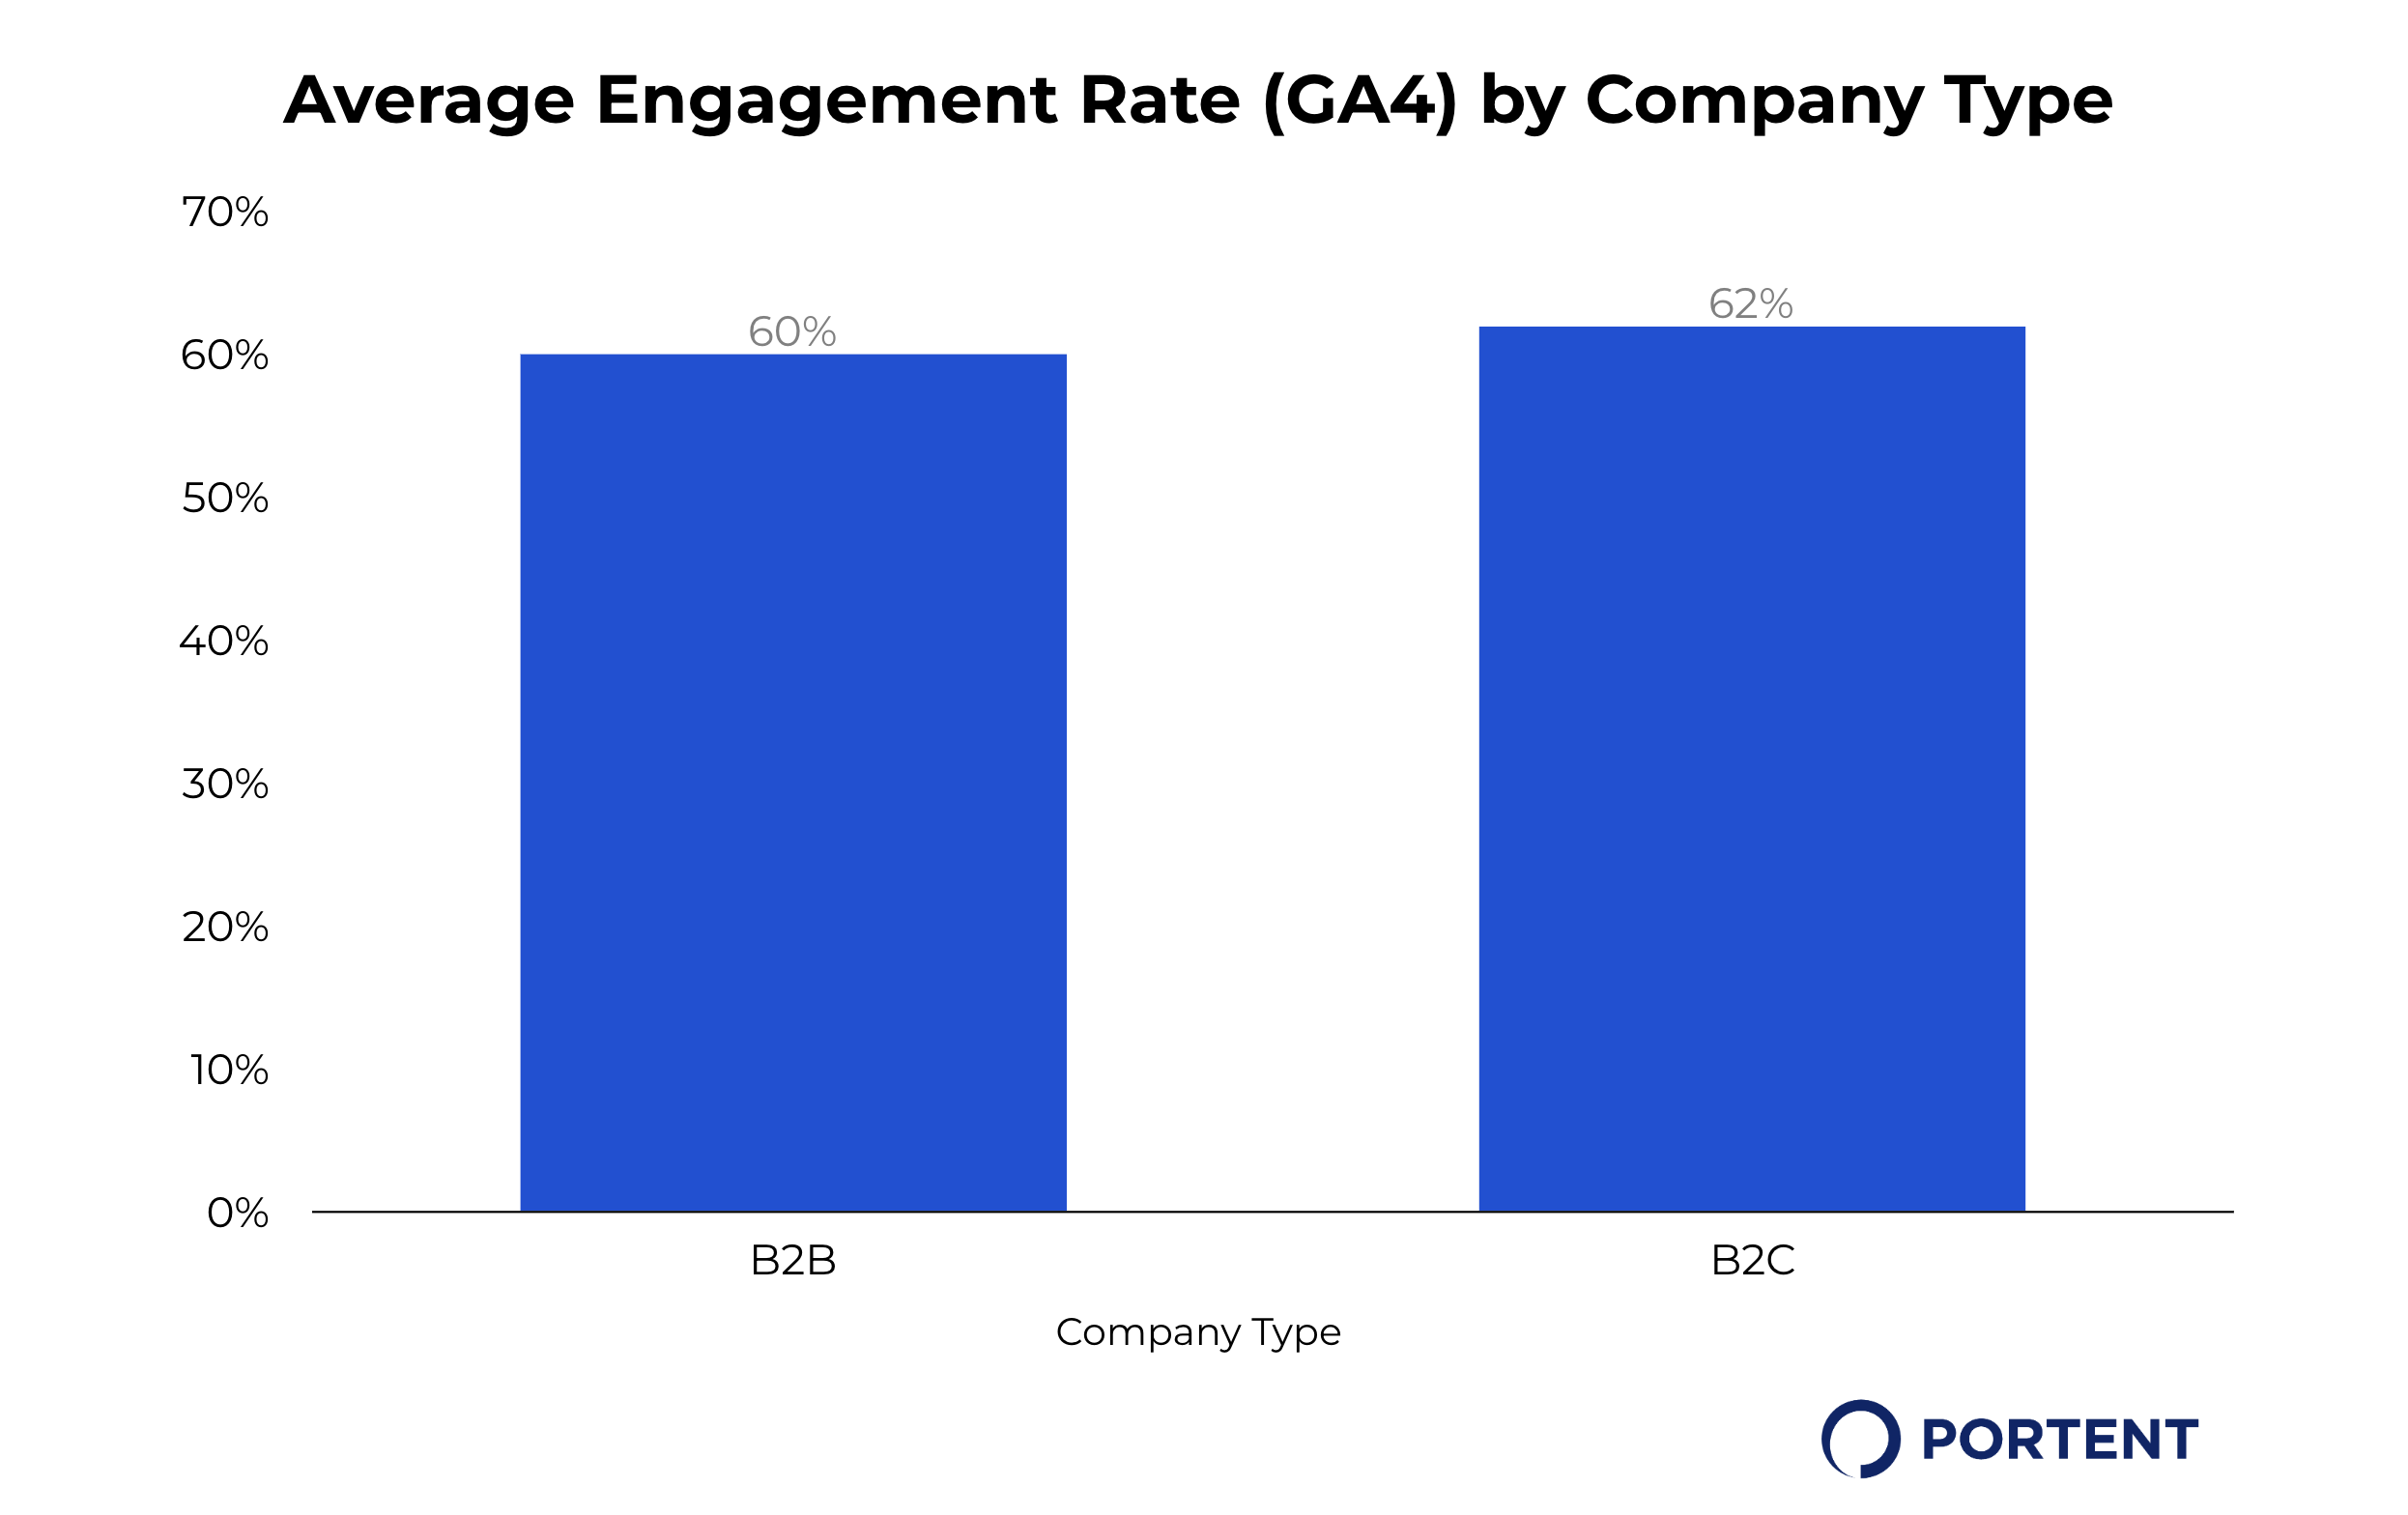 Bar chart depicting average engagement rate (GA4) by company type